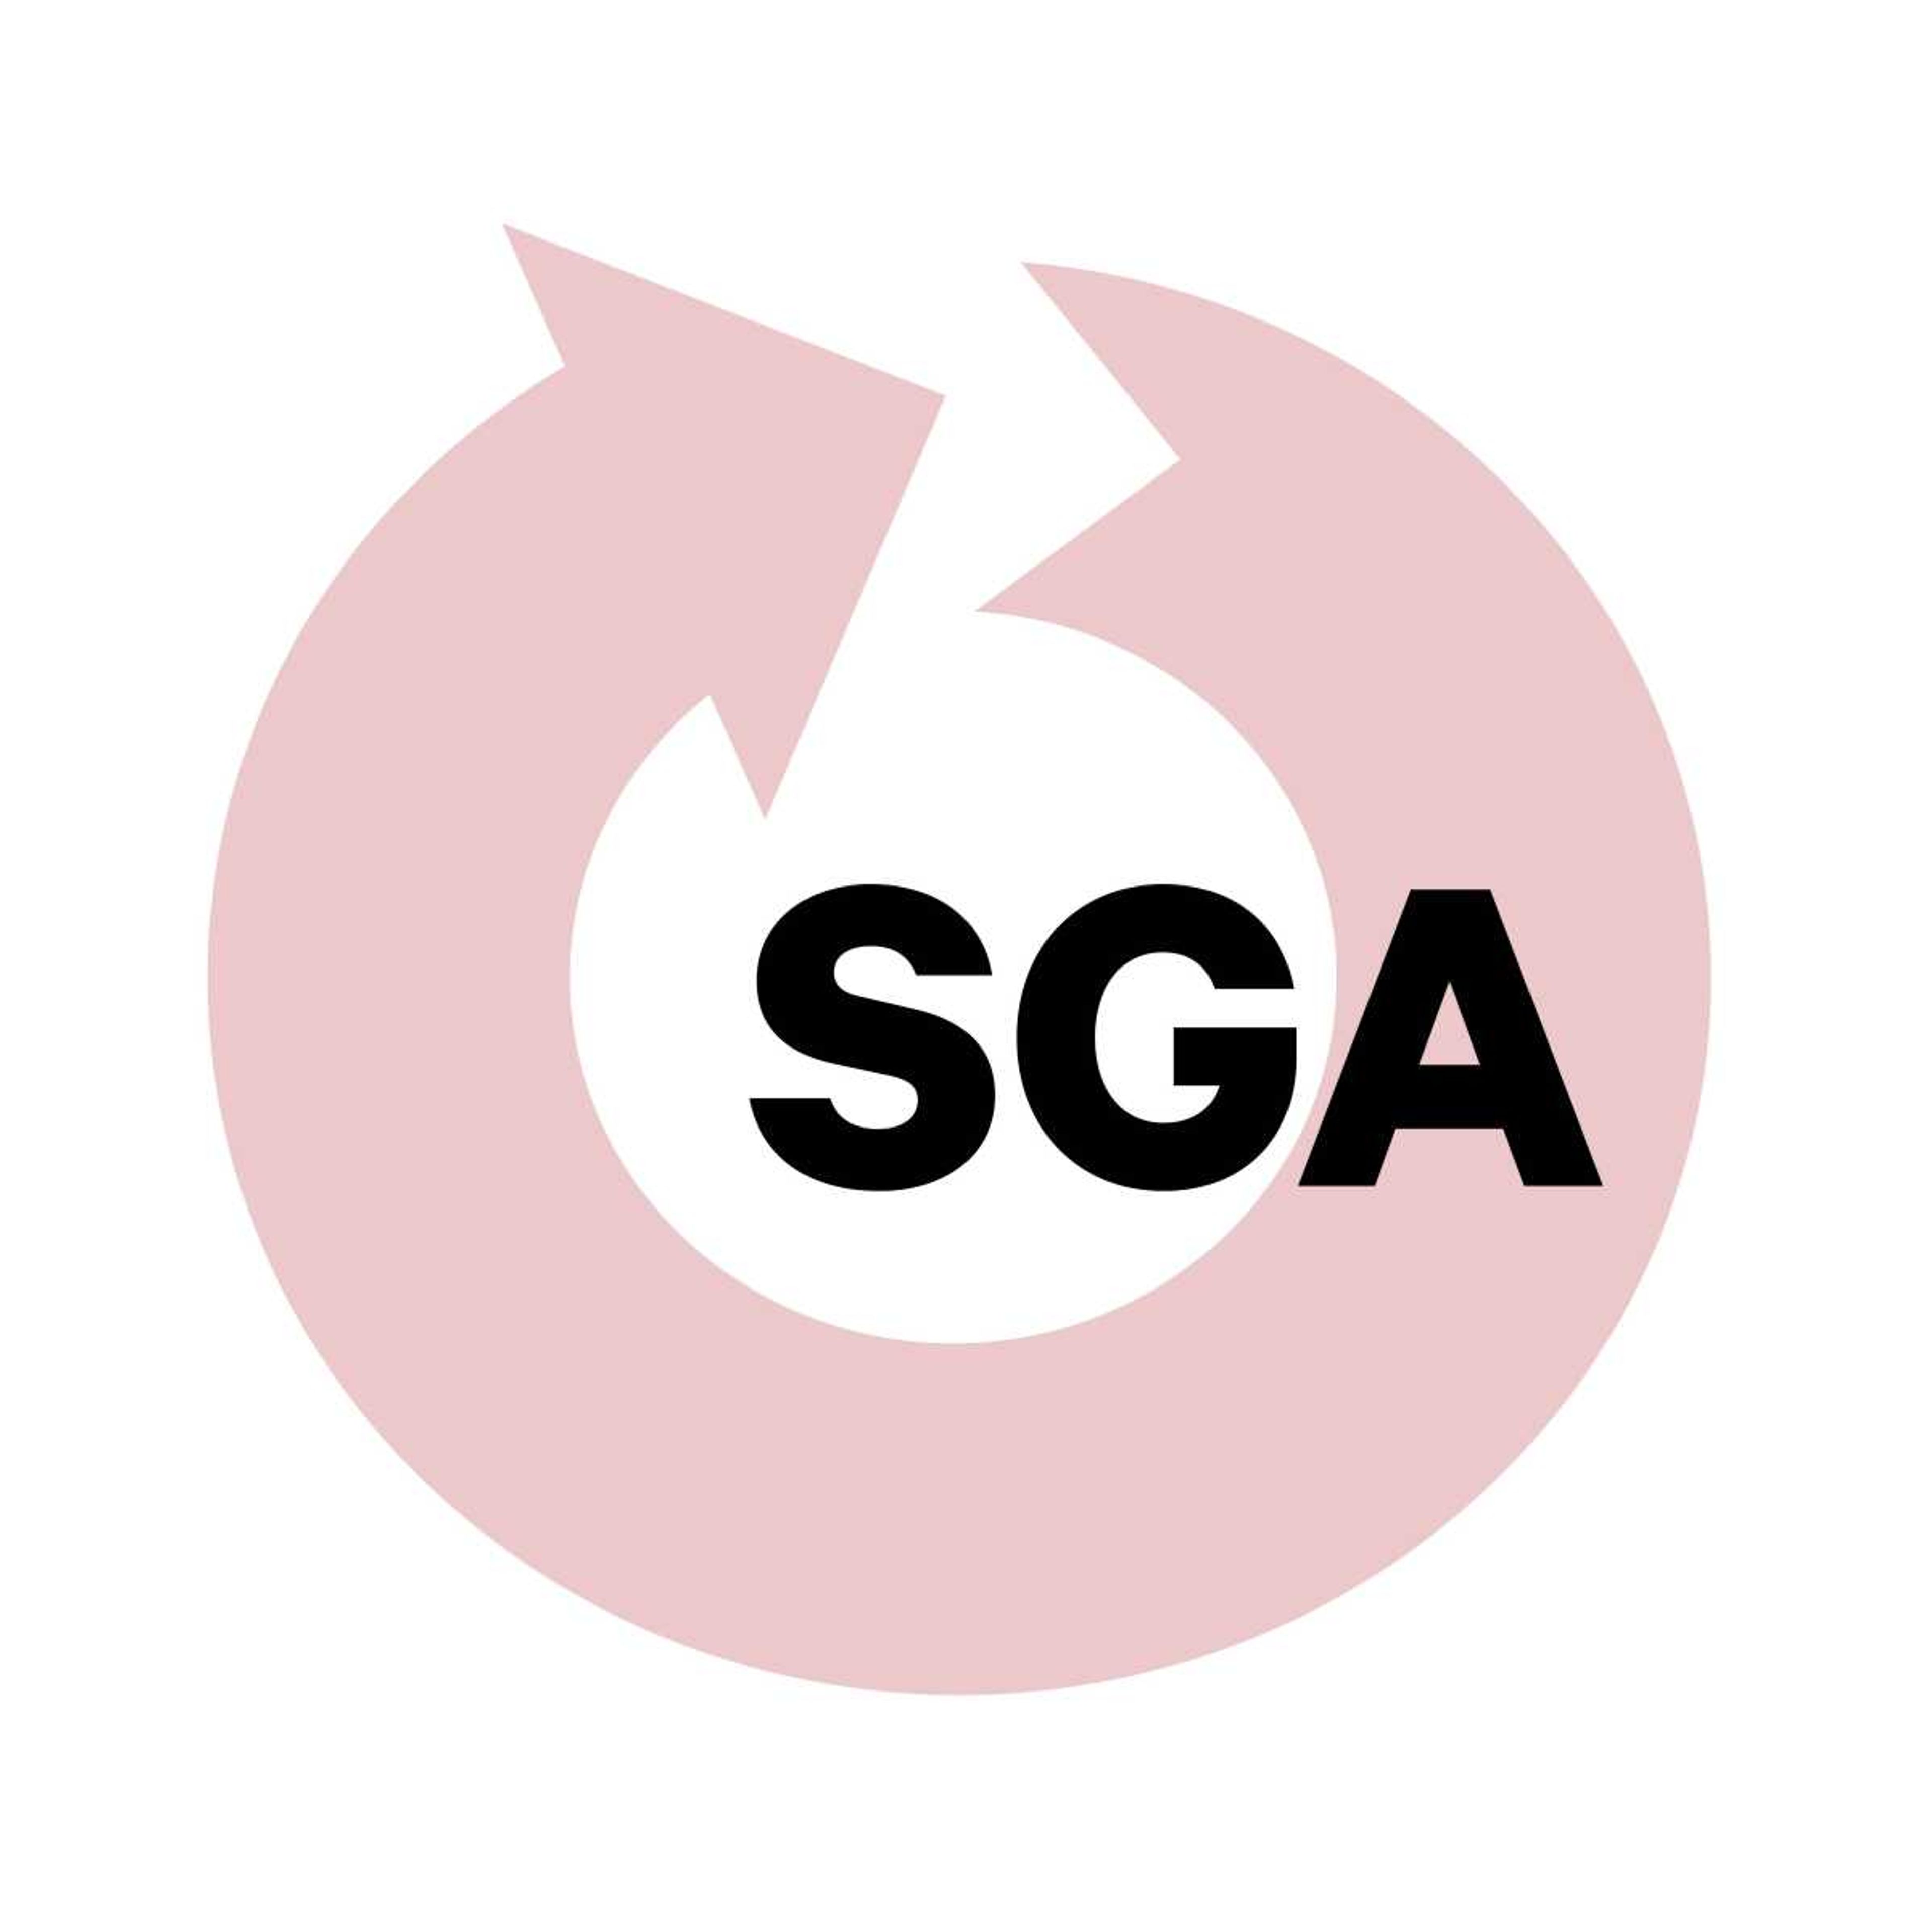 Funding proposal system leads to confusion at SGA meeting